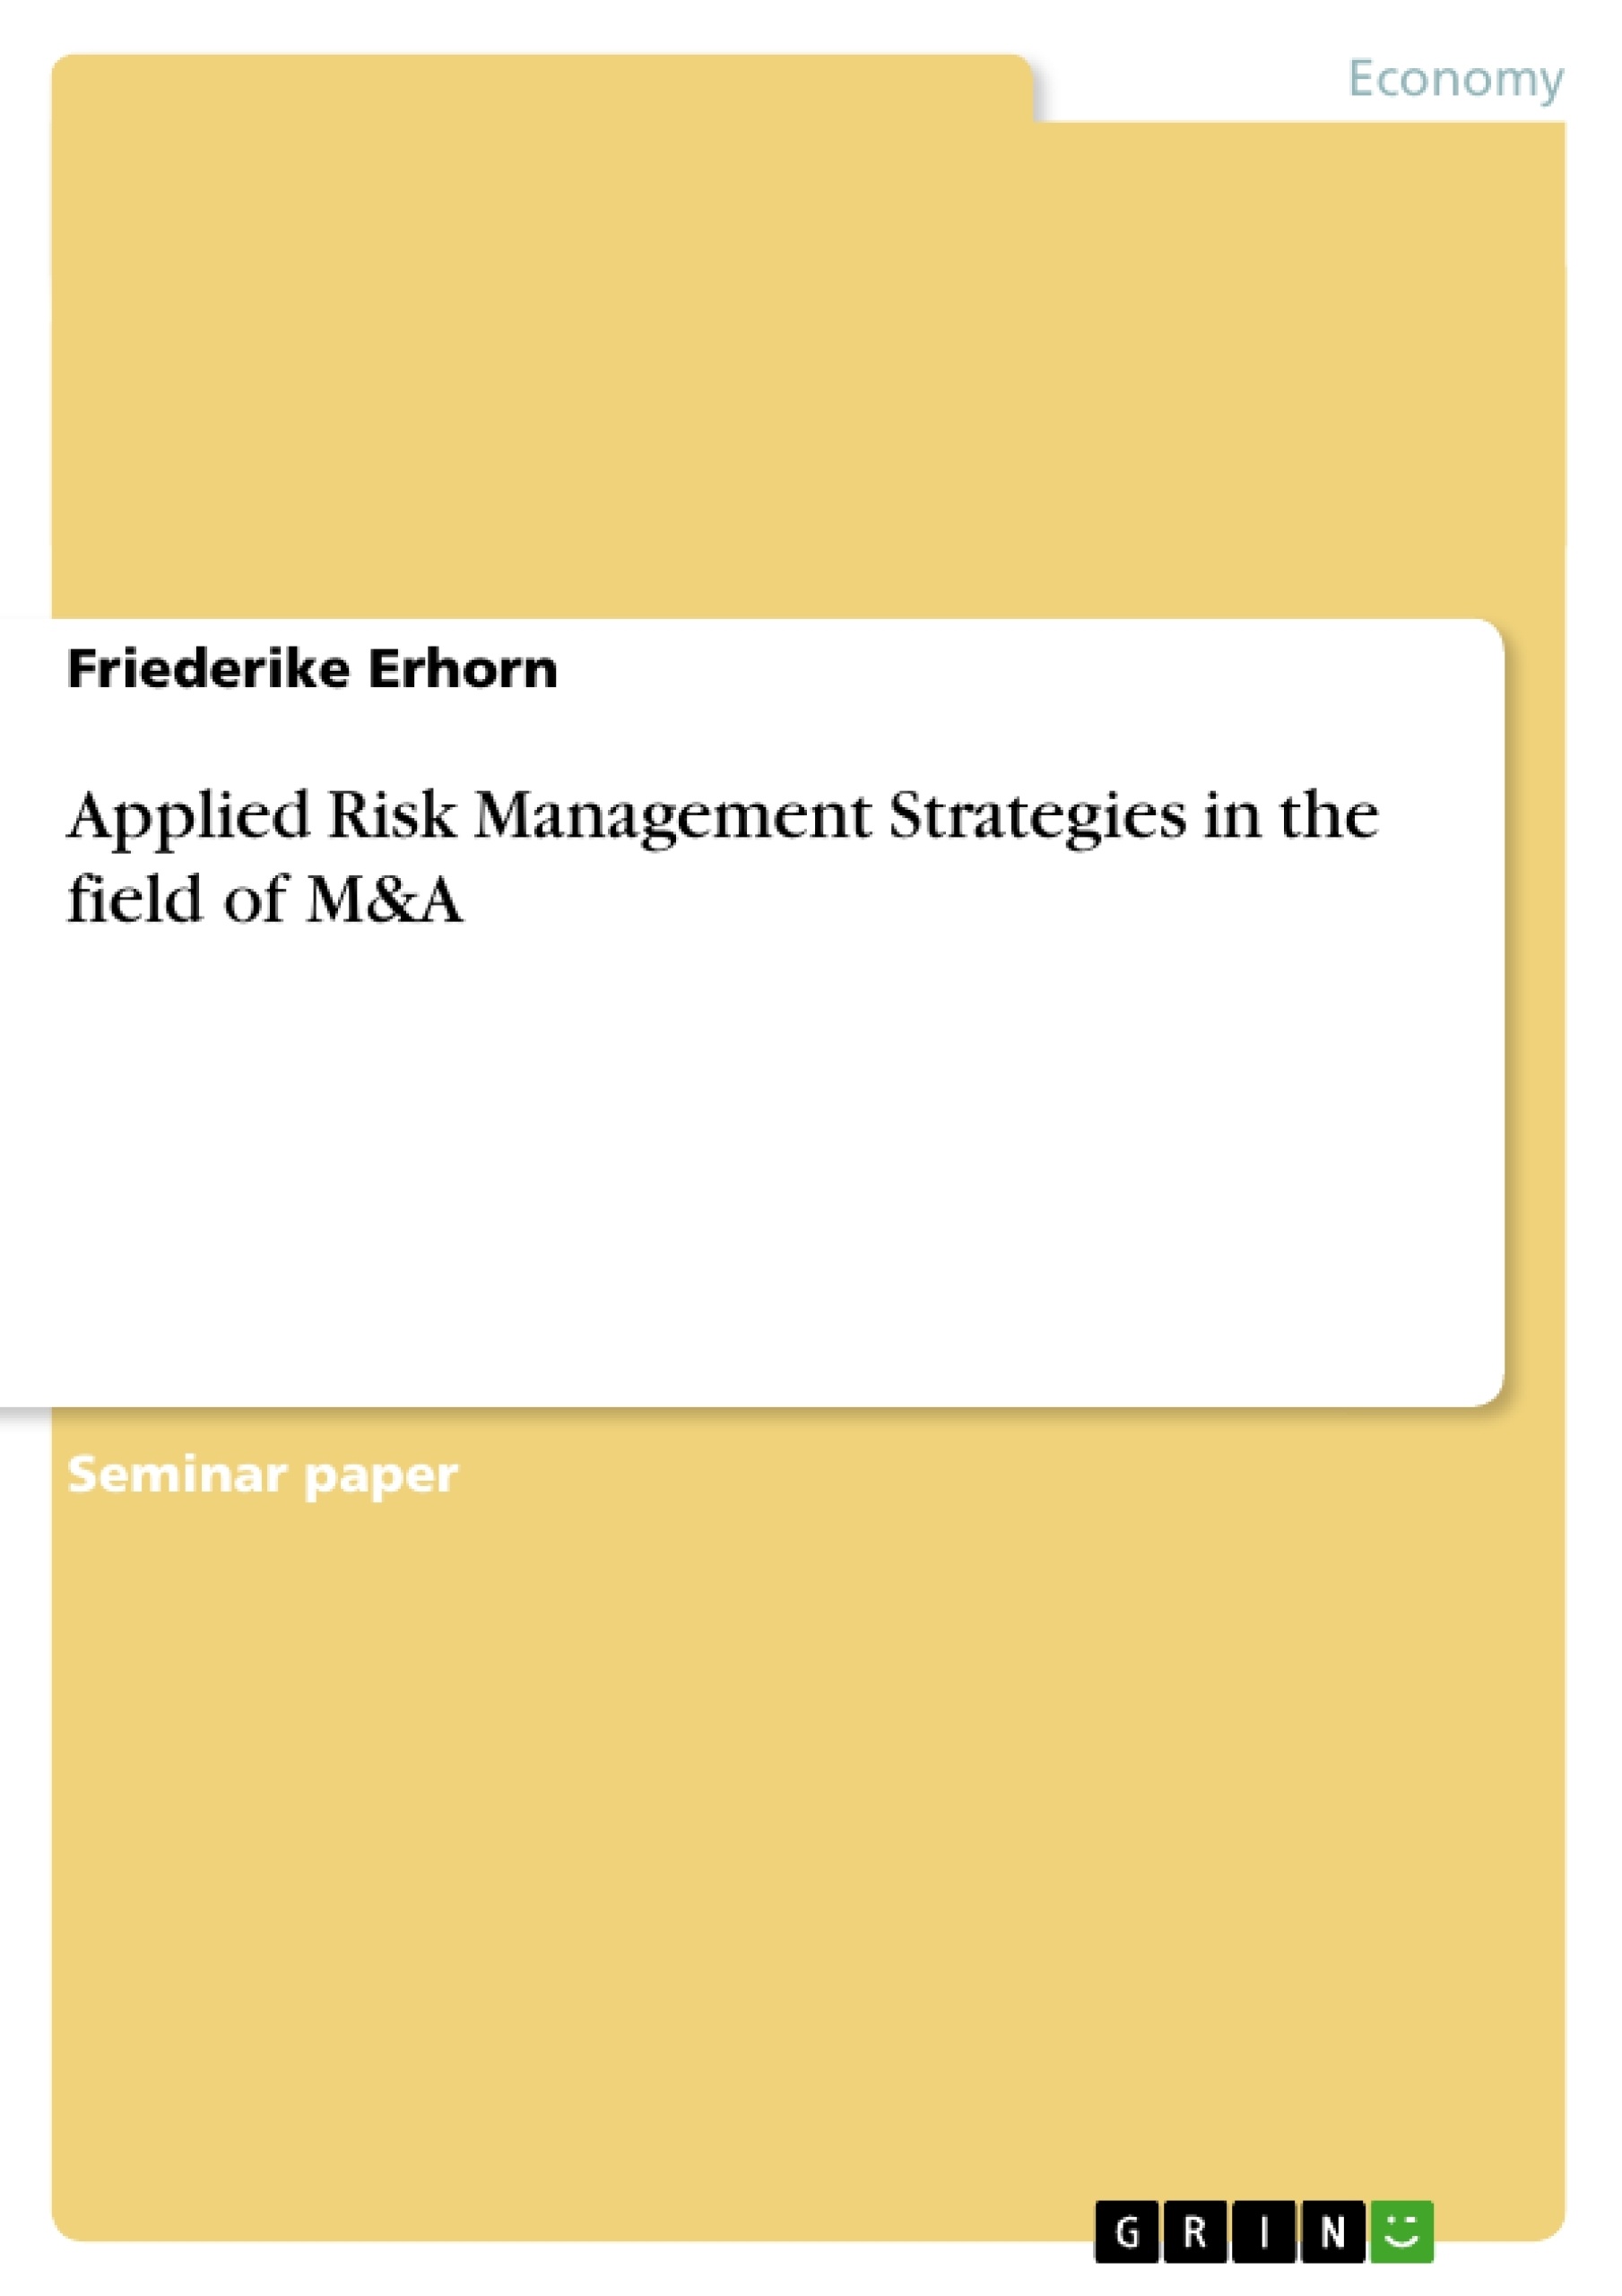 Title: Applied Risk Management Strategies in the field of M&A